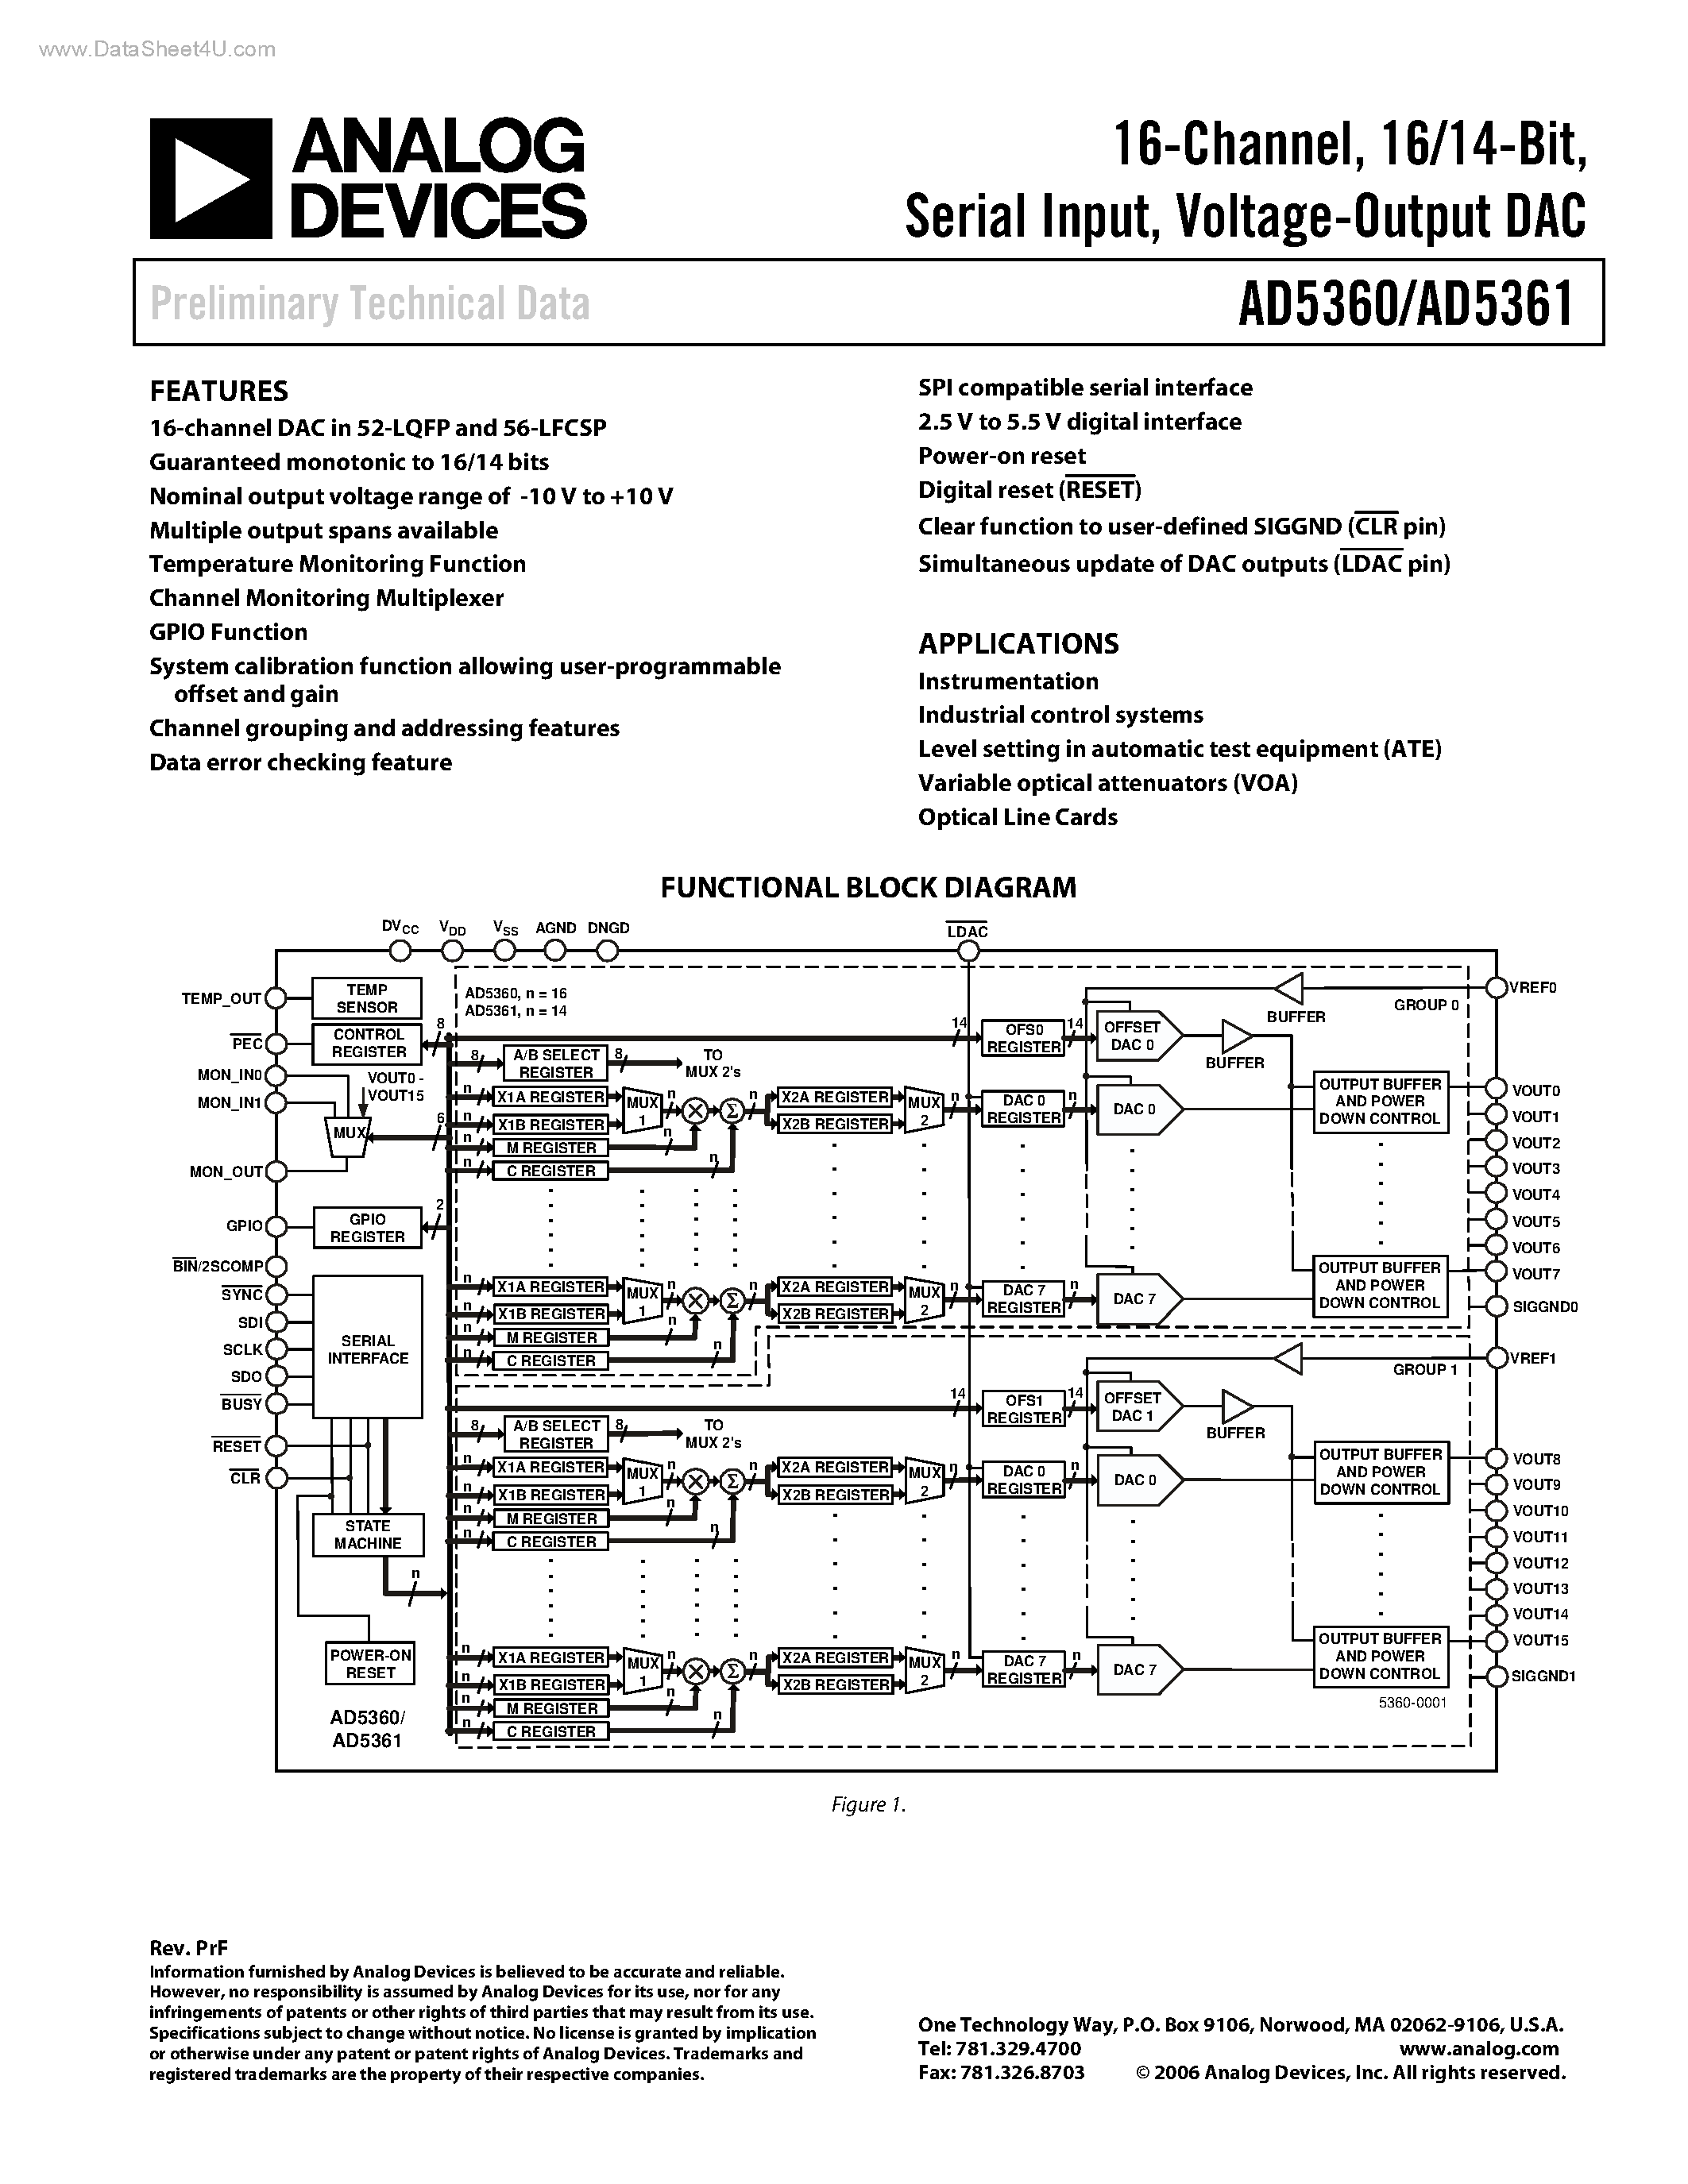 Datasheet AD5360 - (AD5360 / AD5361) Voltage-Output DAC page 1